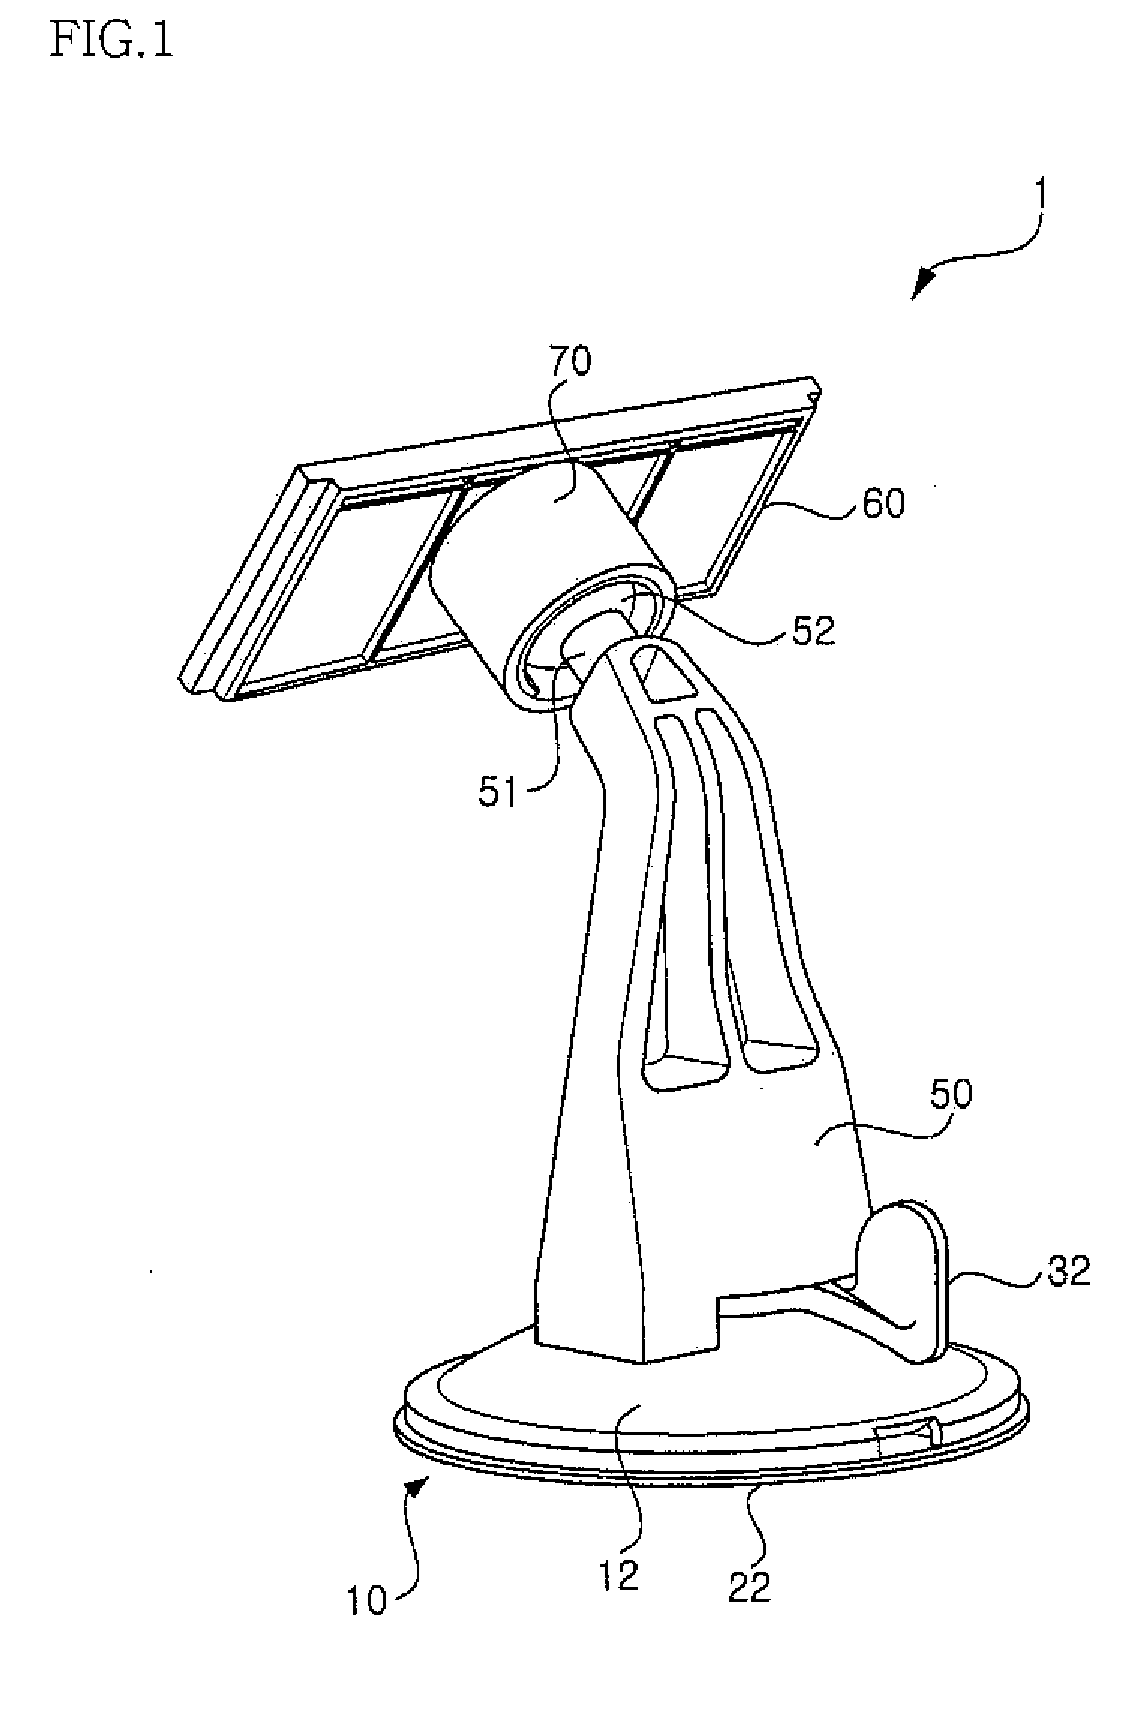 Suction plate and cradle for an automobile having the same